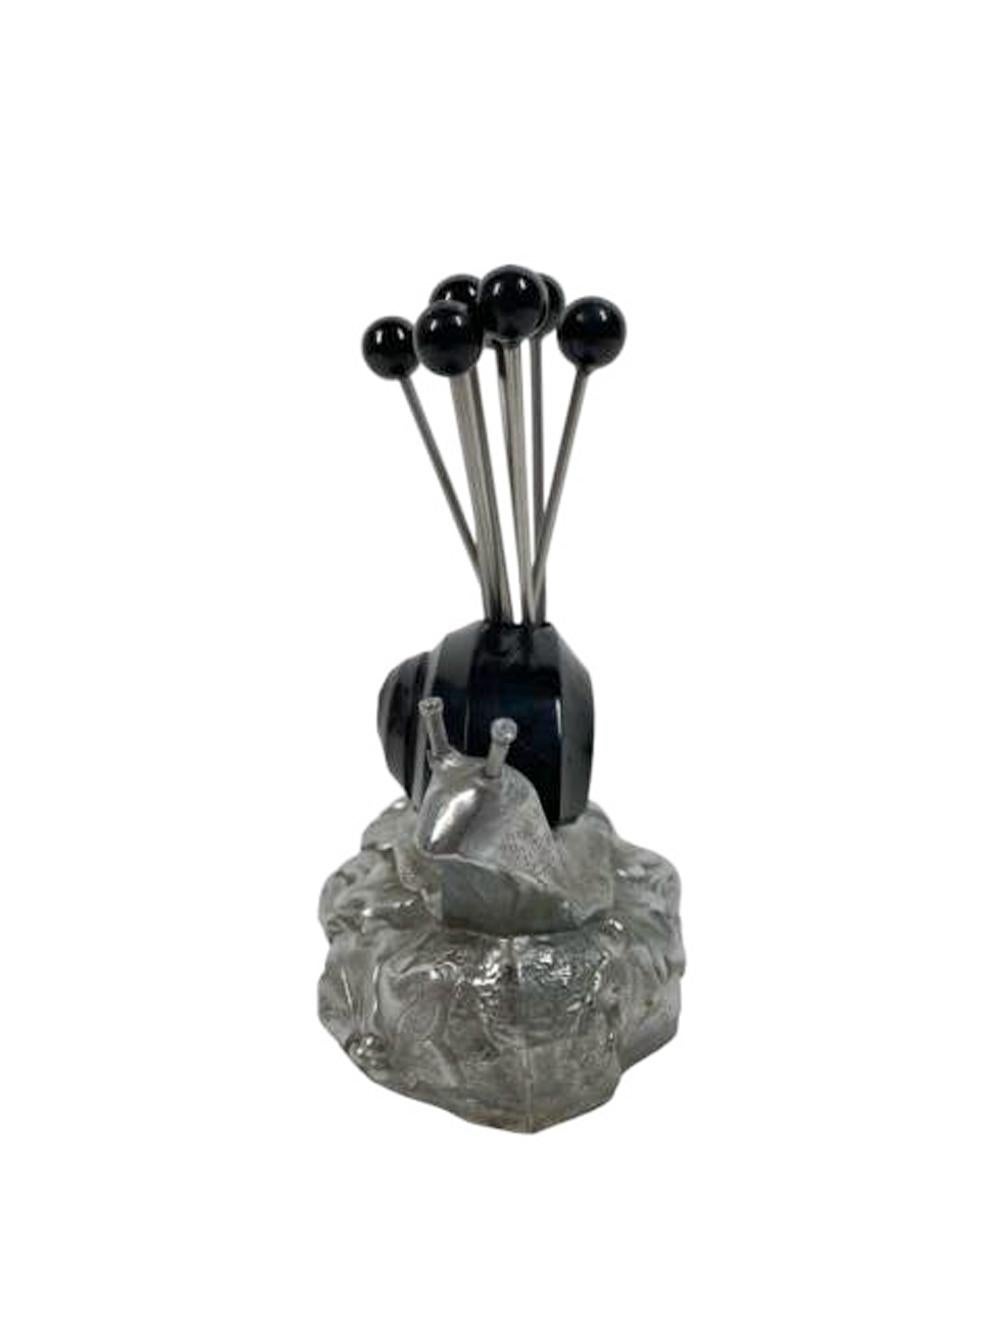 Art Deco cocktail picks with black Bakelite ball tops in a snail-form chrome stand with carved black Bakelite shell.